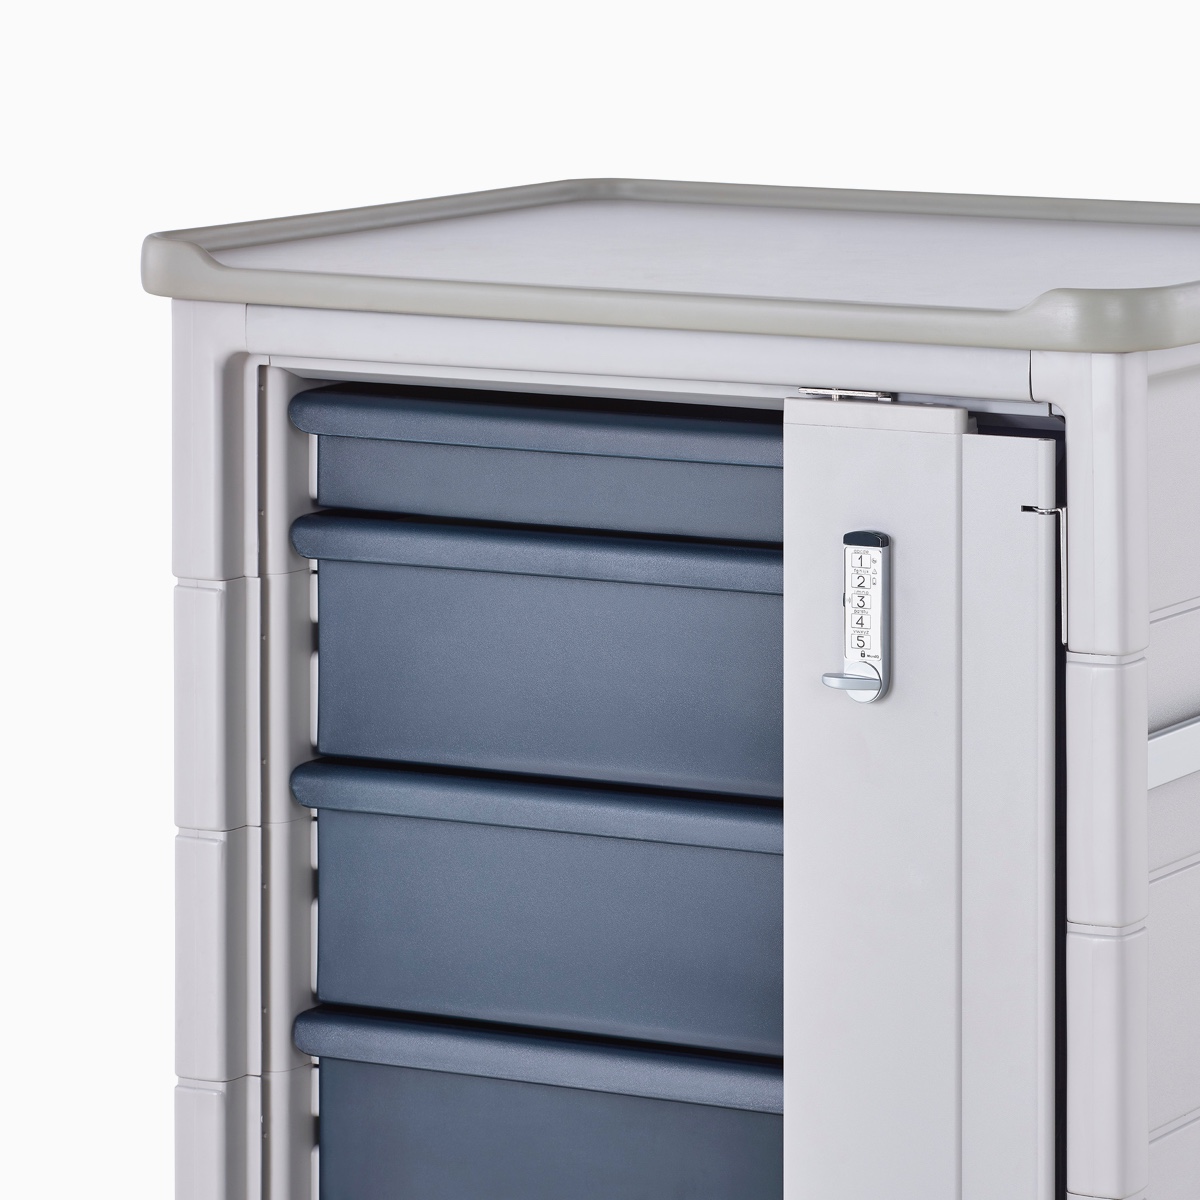 Detail of Procedure and Supply Cart in a light gray body and dark blue modular drawers and lock bar with keyless lock.